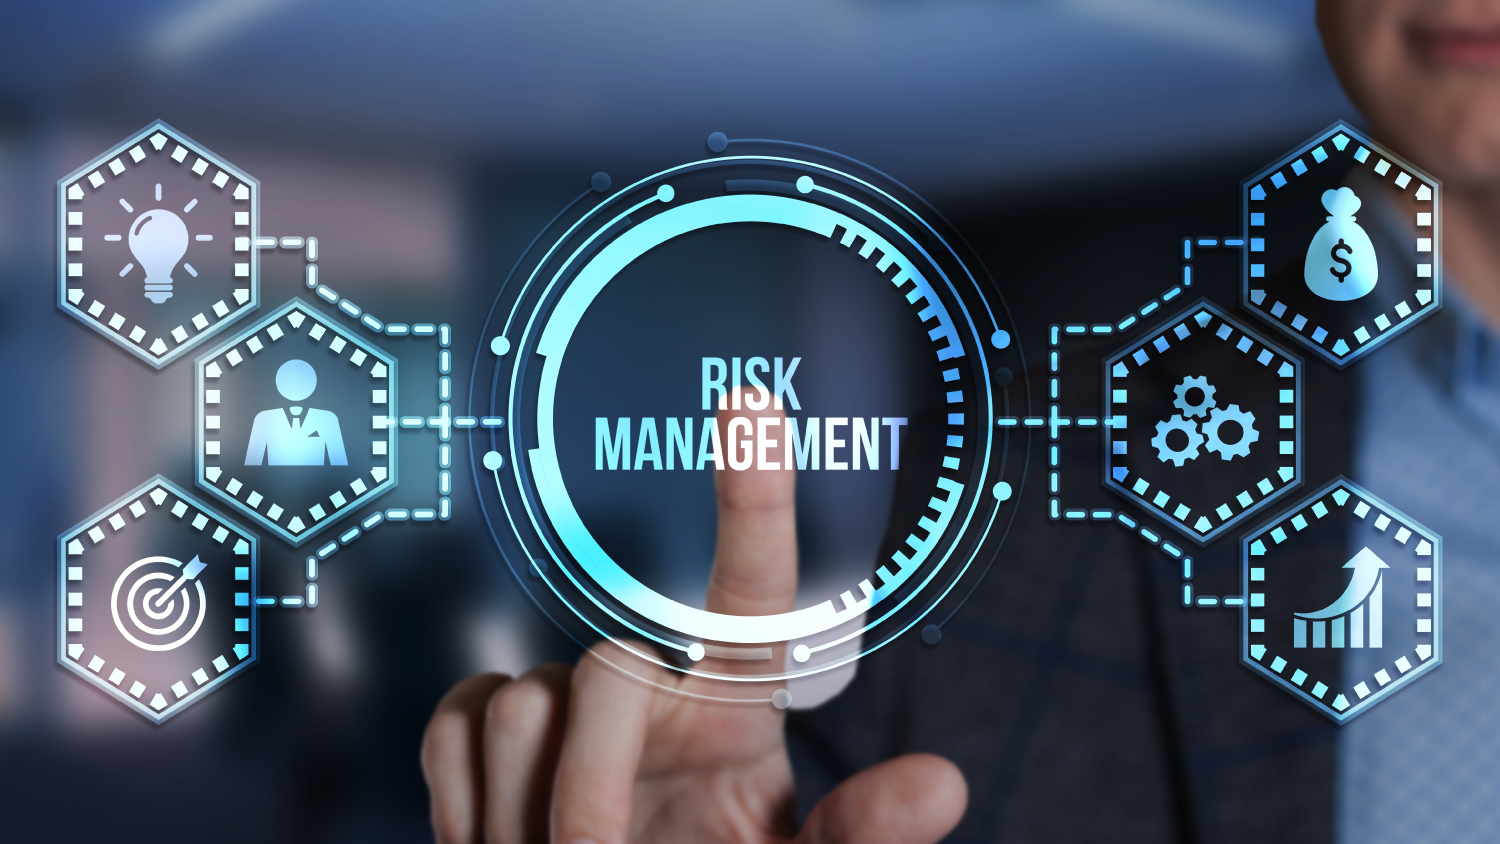 Cyber Defenses and Cyber Insurance: A Holistic Approach to Cyber Risk Management